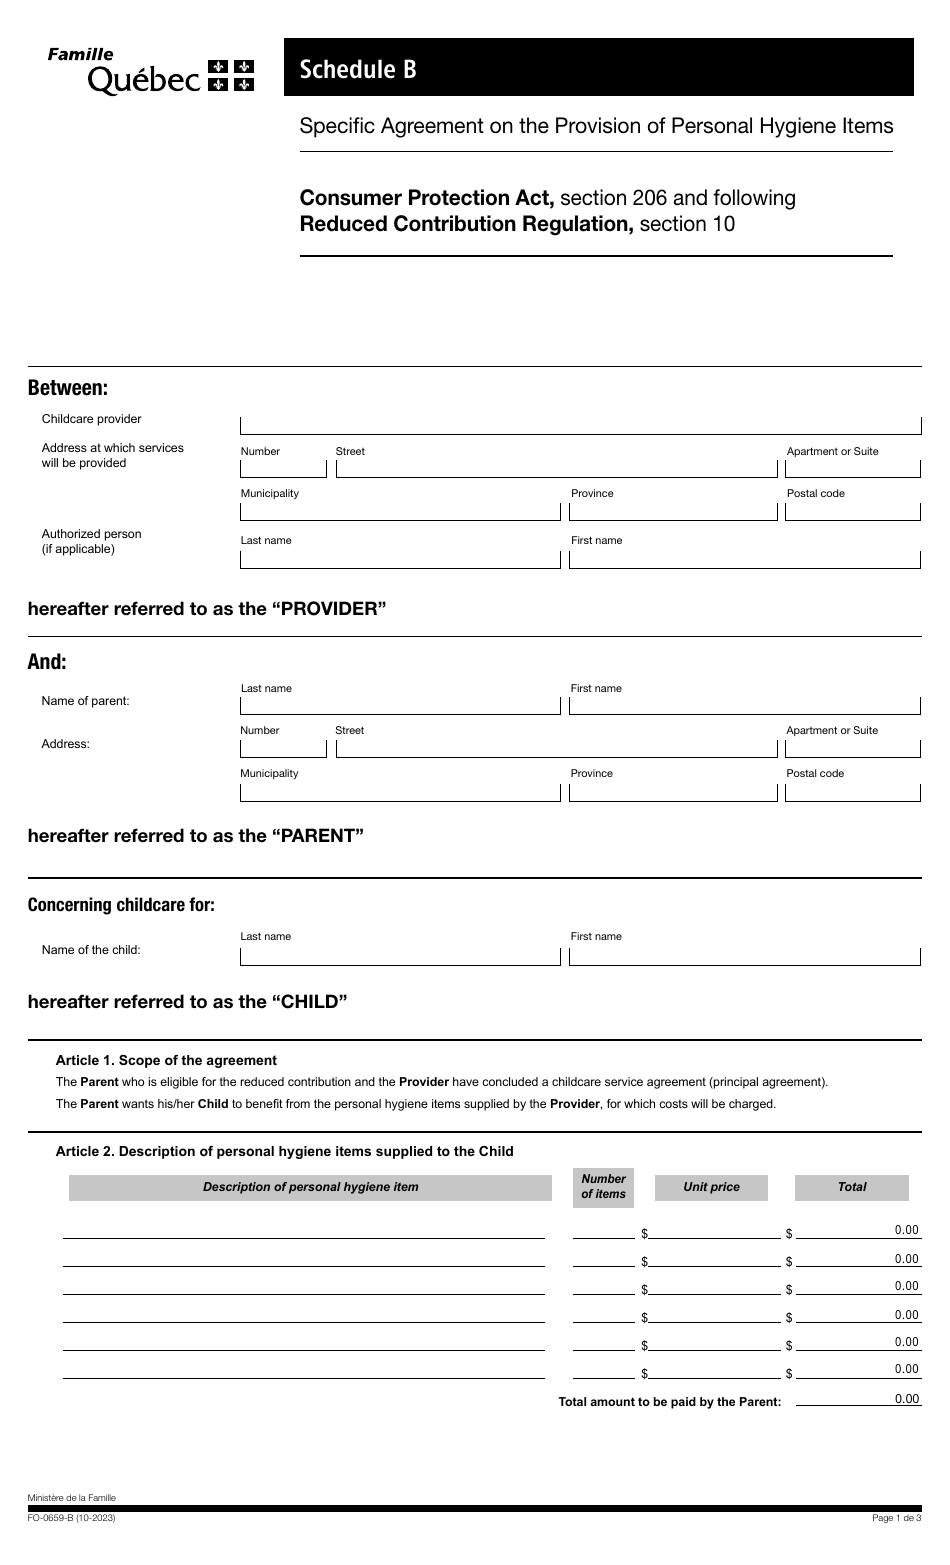 Form FO-0659-B Schedule B Specifc Agreement on the Provision of Personal Hygiene Items - Quebec, Canada, Page 1